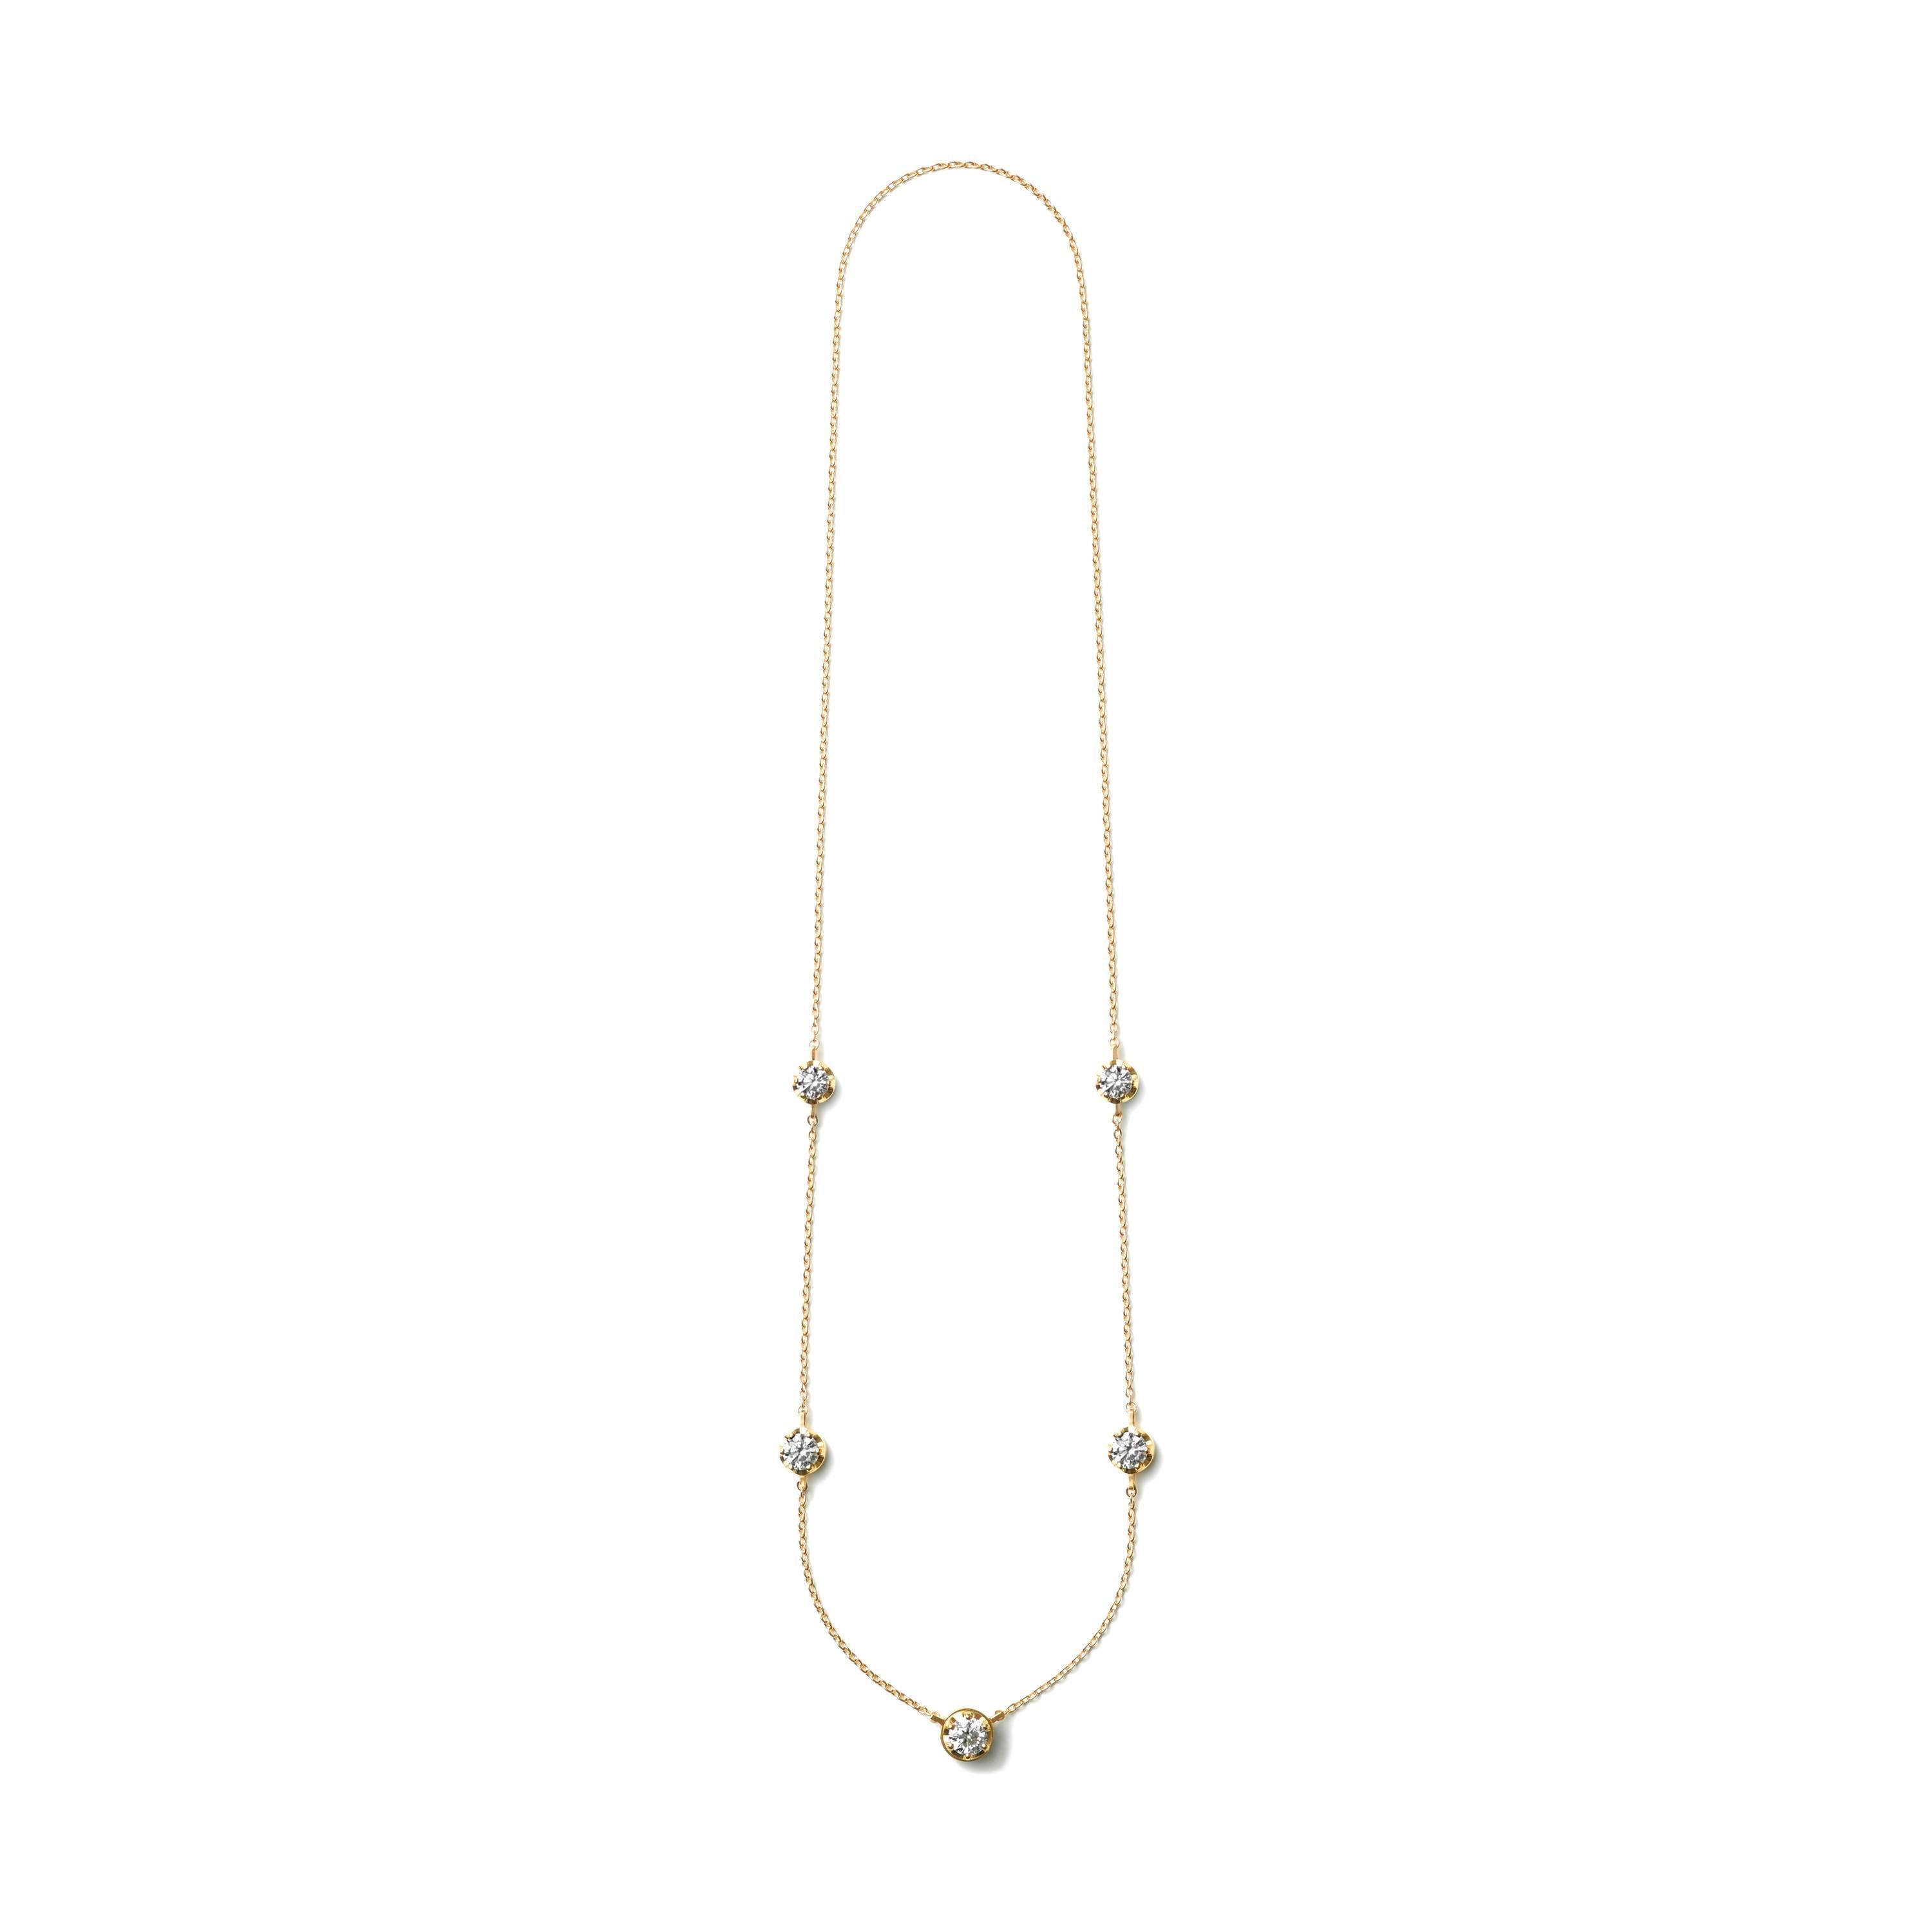 A necklace featuring five graduating sizes of diamonds. The bottom diamond setting doubles as a hidden clasp. Turn it horizontally 45 degrees to open and close. Available in 3 other varieties.

18 Karat Yellow Gold Five-Stone Diamond Necklace
Chain